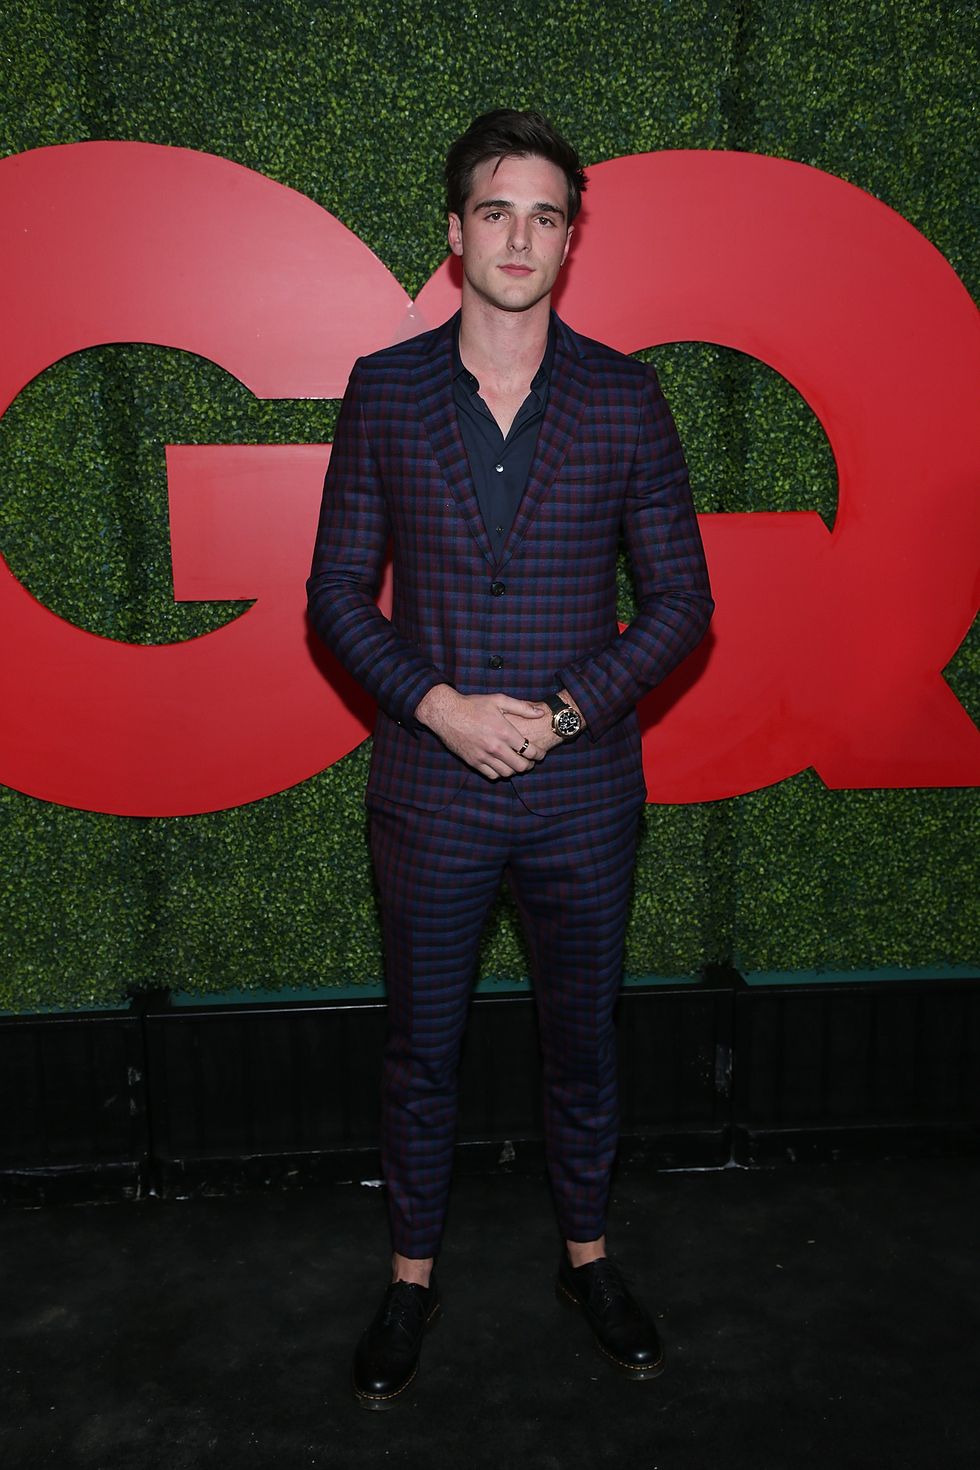 beverly hills, ca december 06 jacob elordi attends the 2018 gq men of the year party at benedict estate on december 6, 2018 in beverly hills, california photo by phillip faraonegetty images,